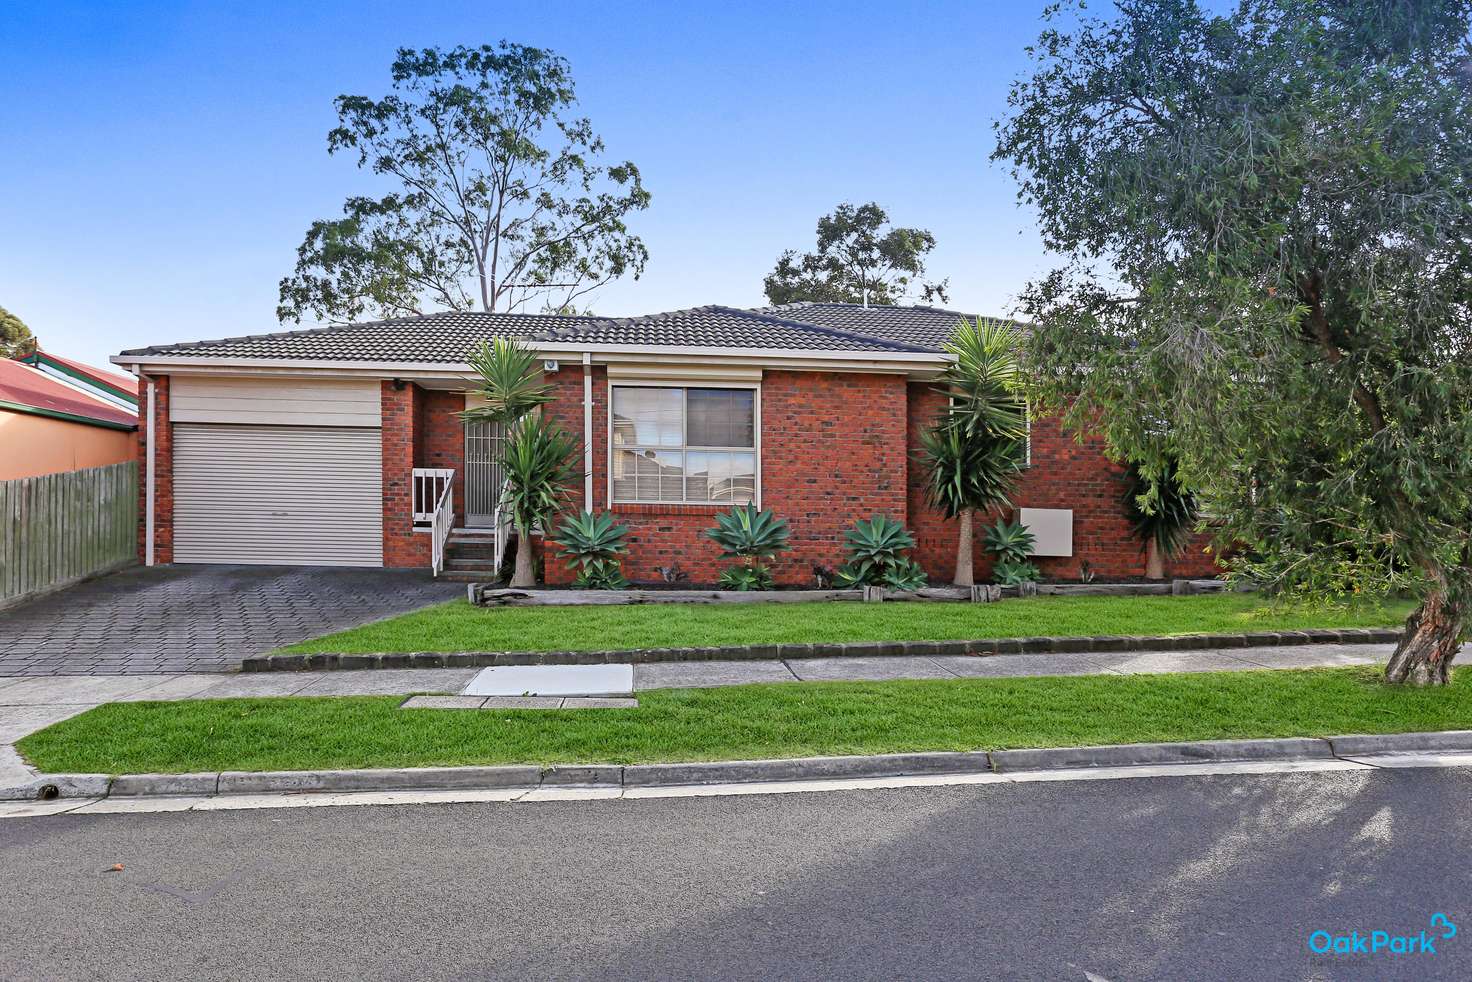 Main view of Homely house listing, 1A Strachan Street, Oak Park VIC 3046